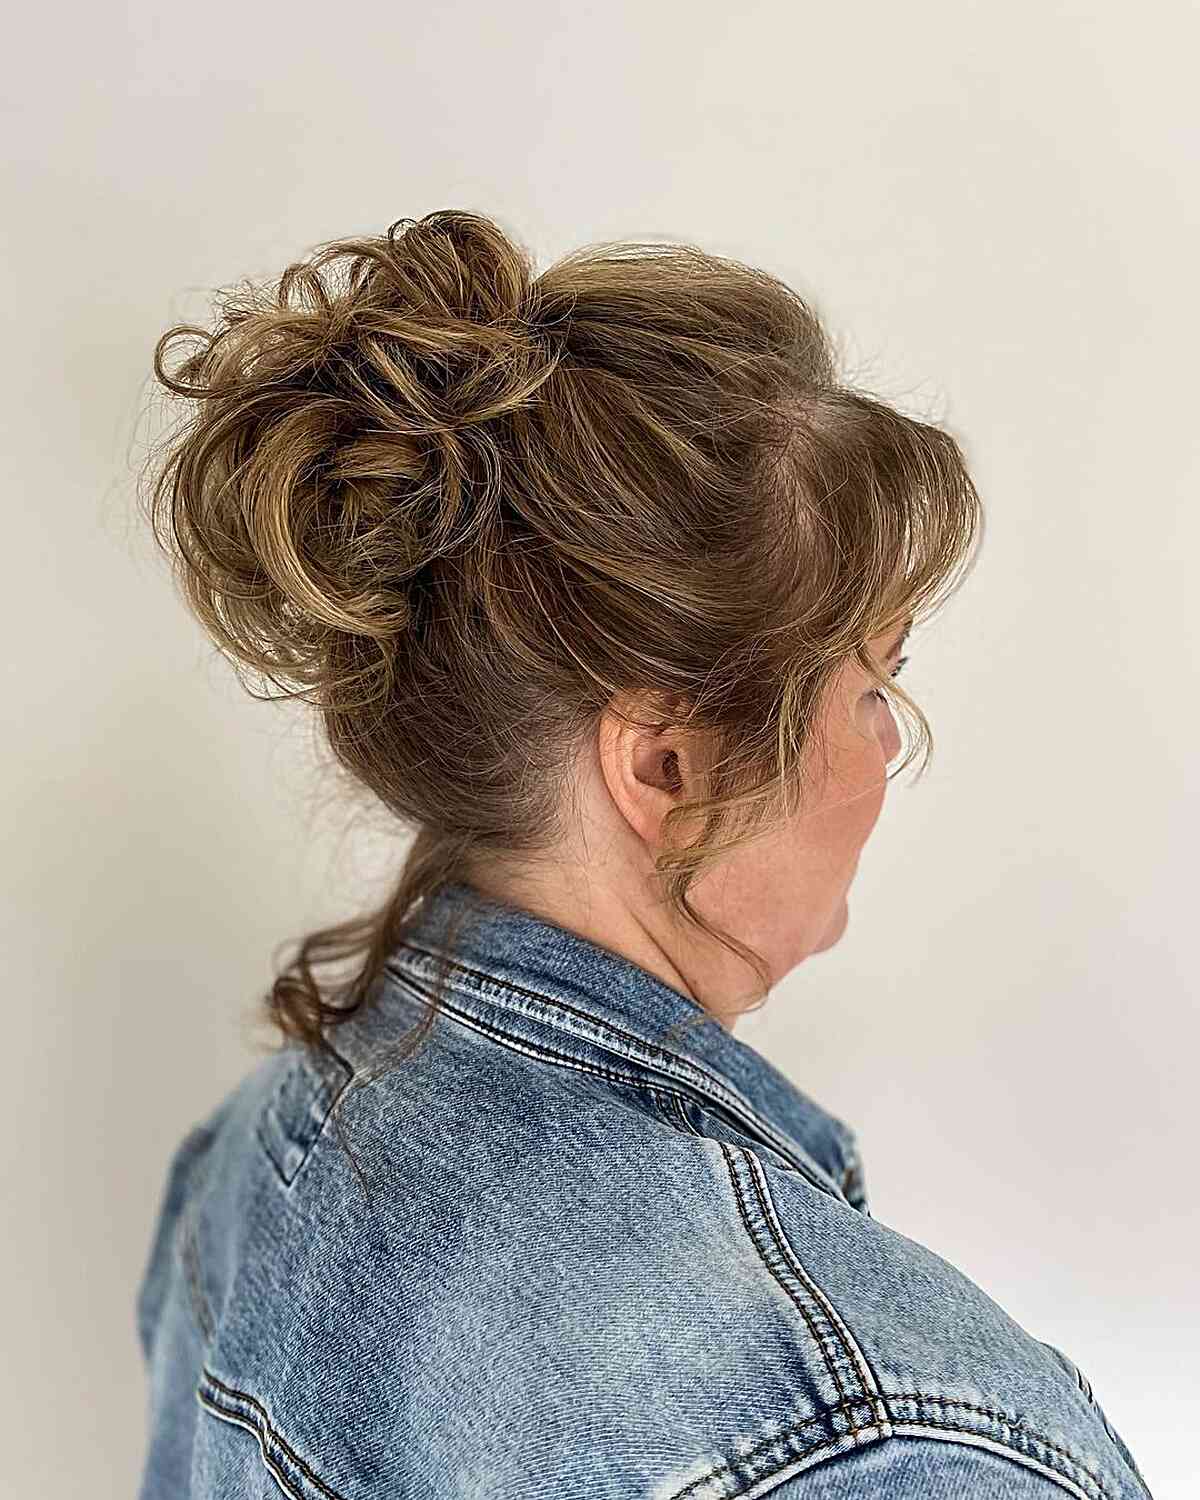 Face-Framing High Loose Knot Hairstyle for Older Wedding Guests